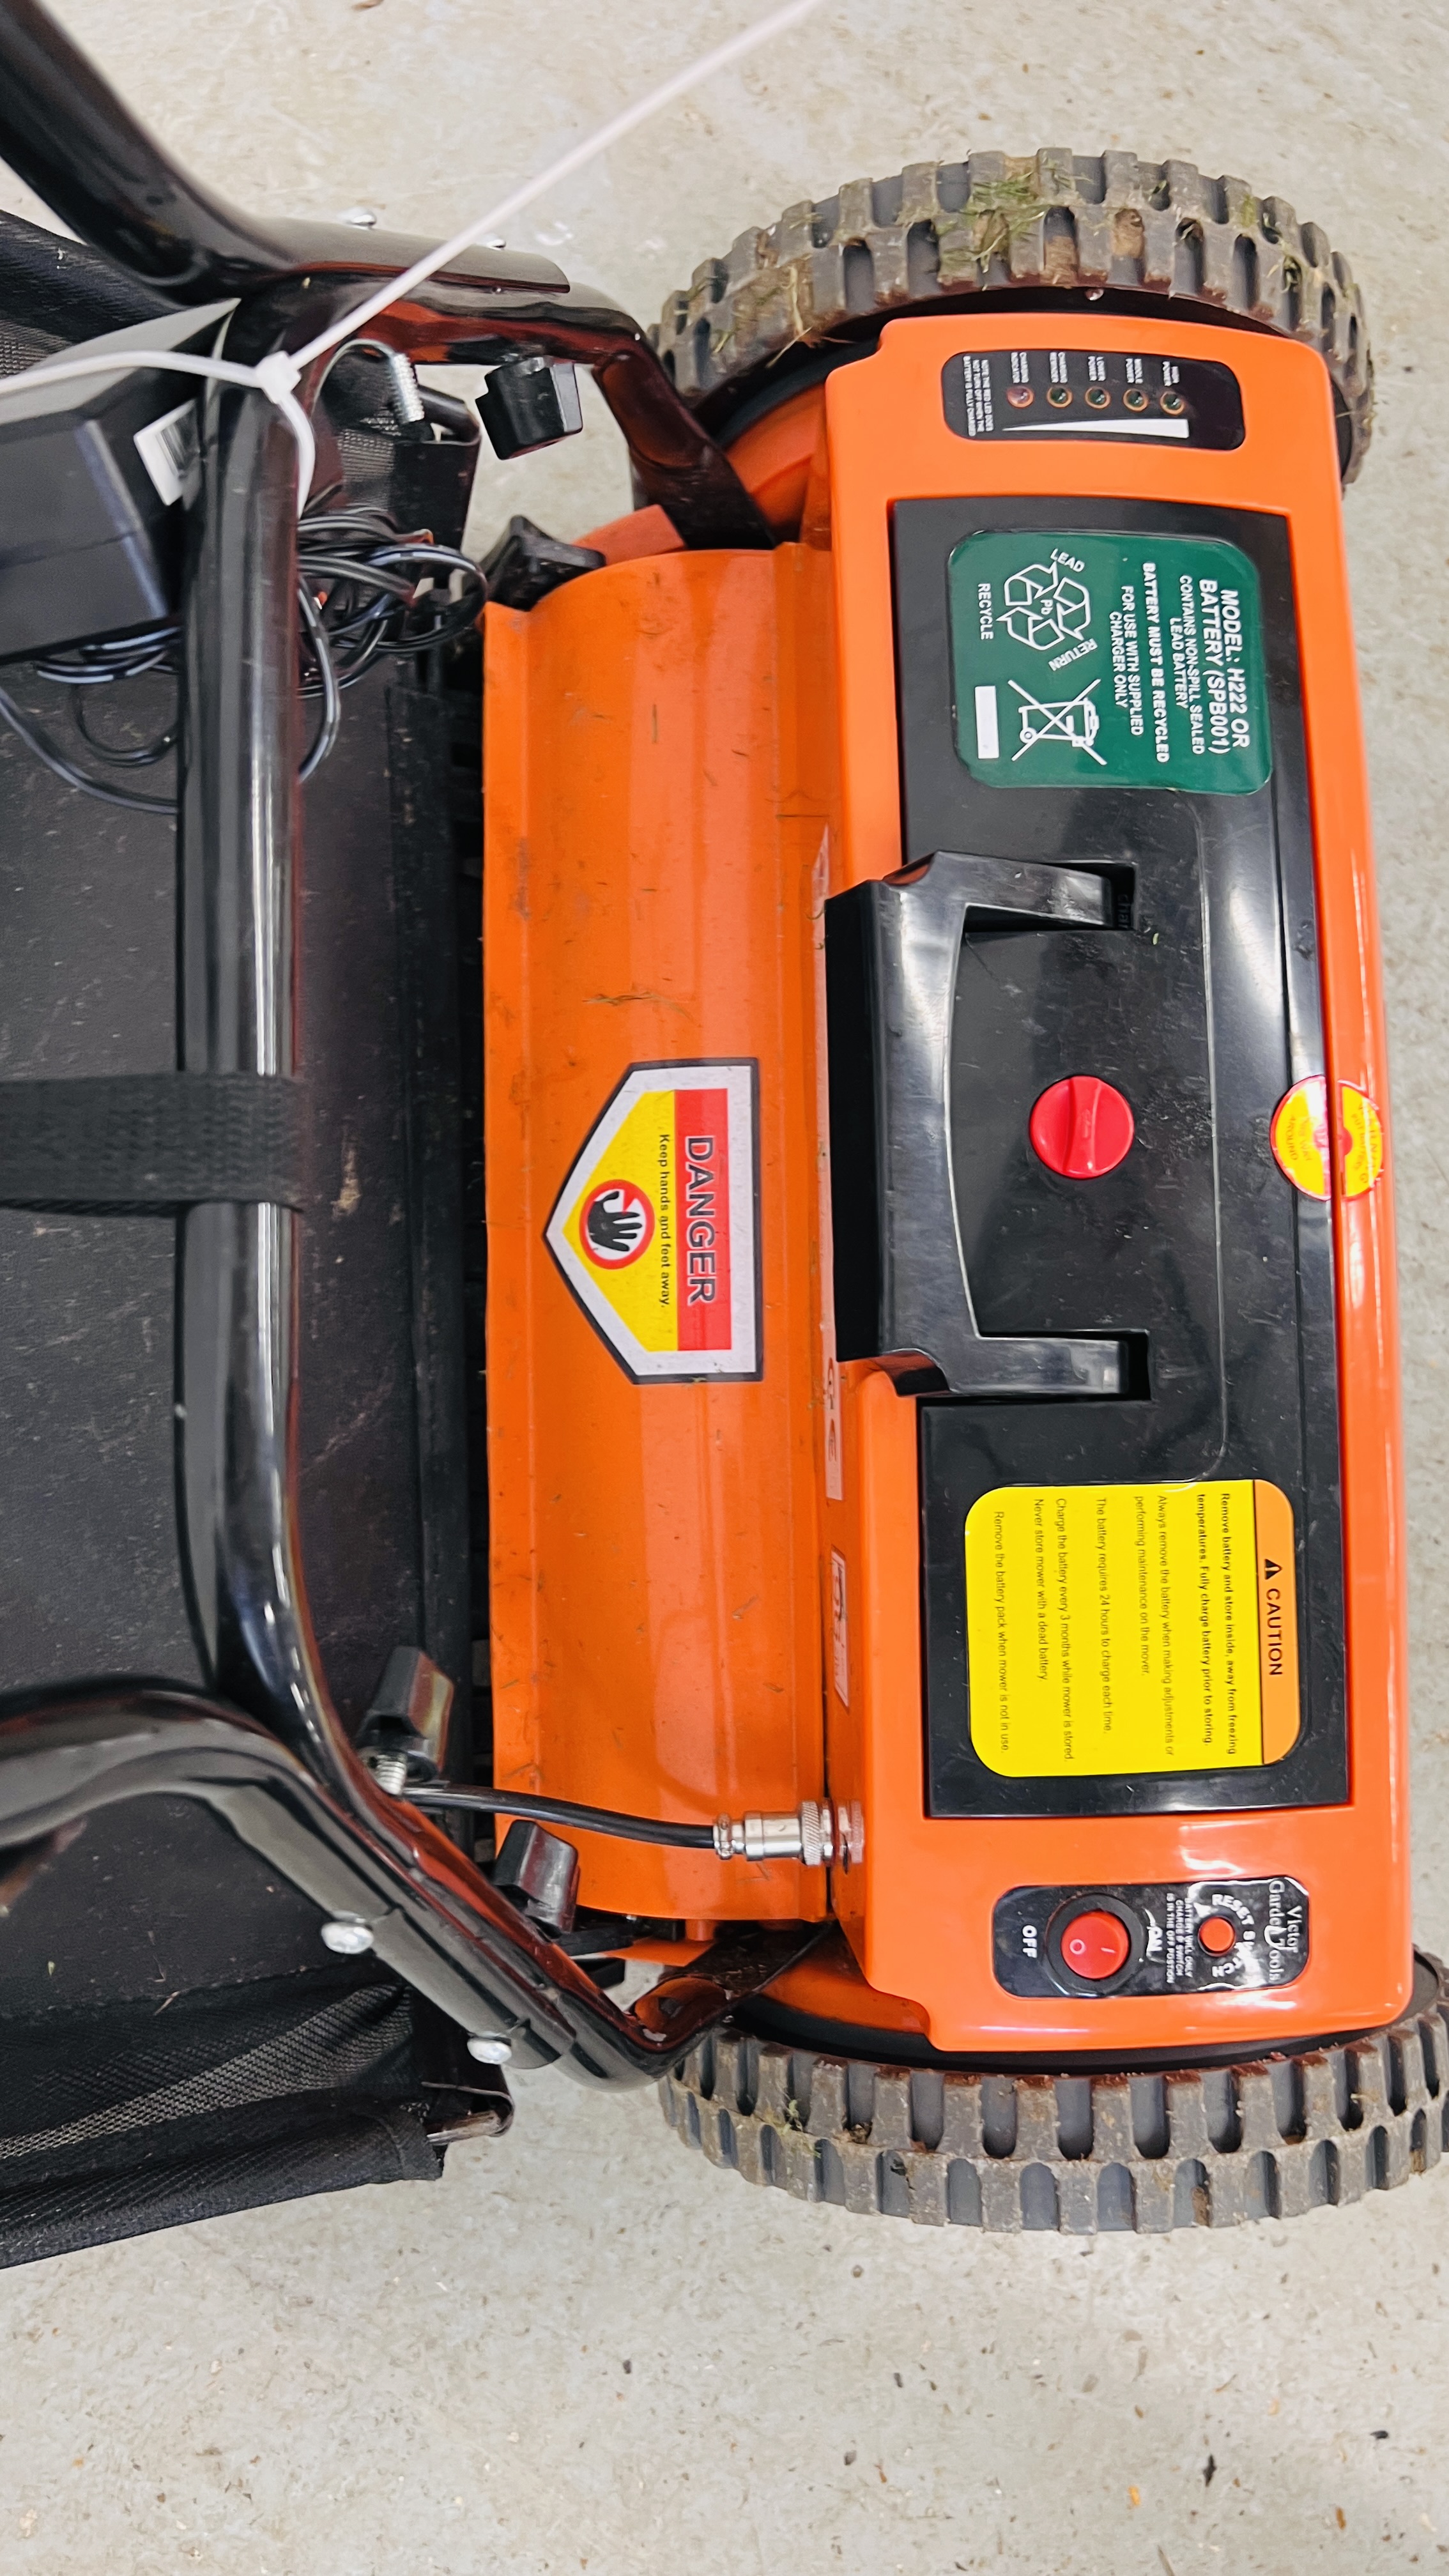 A VICTOR GARDEN TOOLS 24 VOLT RECHARGEABLE CYLINDER MOWER COMPLETE WITH CHARGER AND MANUAL. - Image 5 of 6